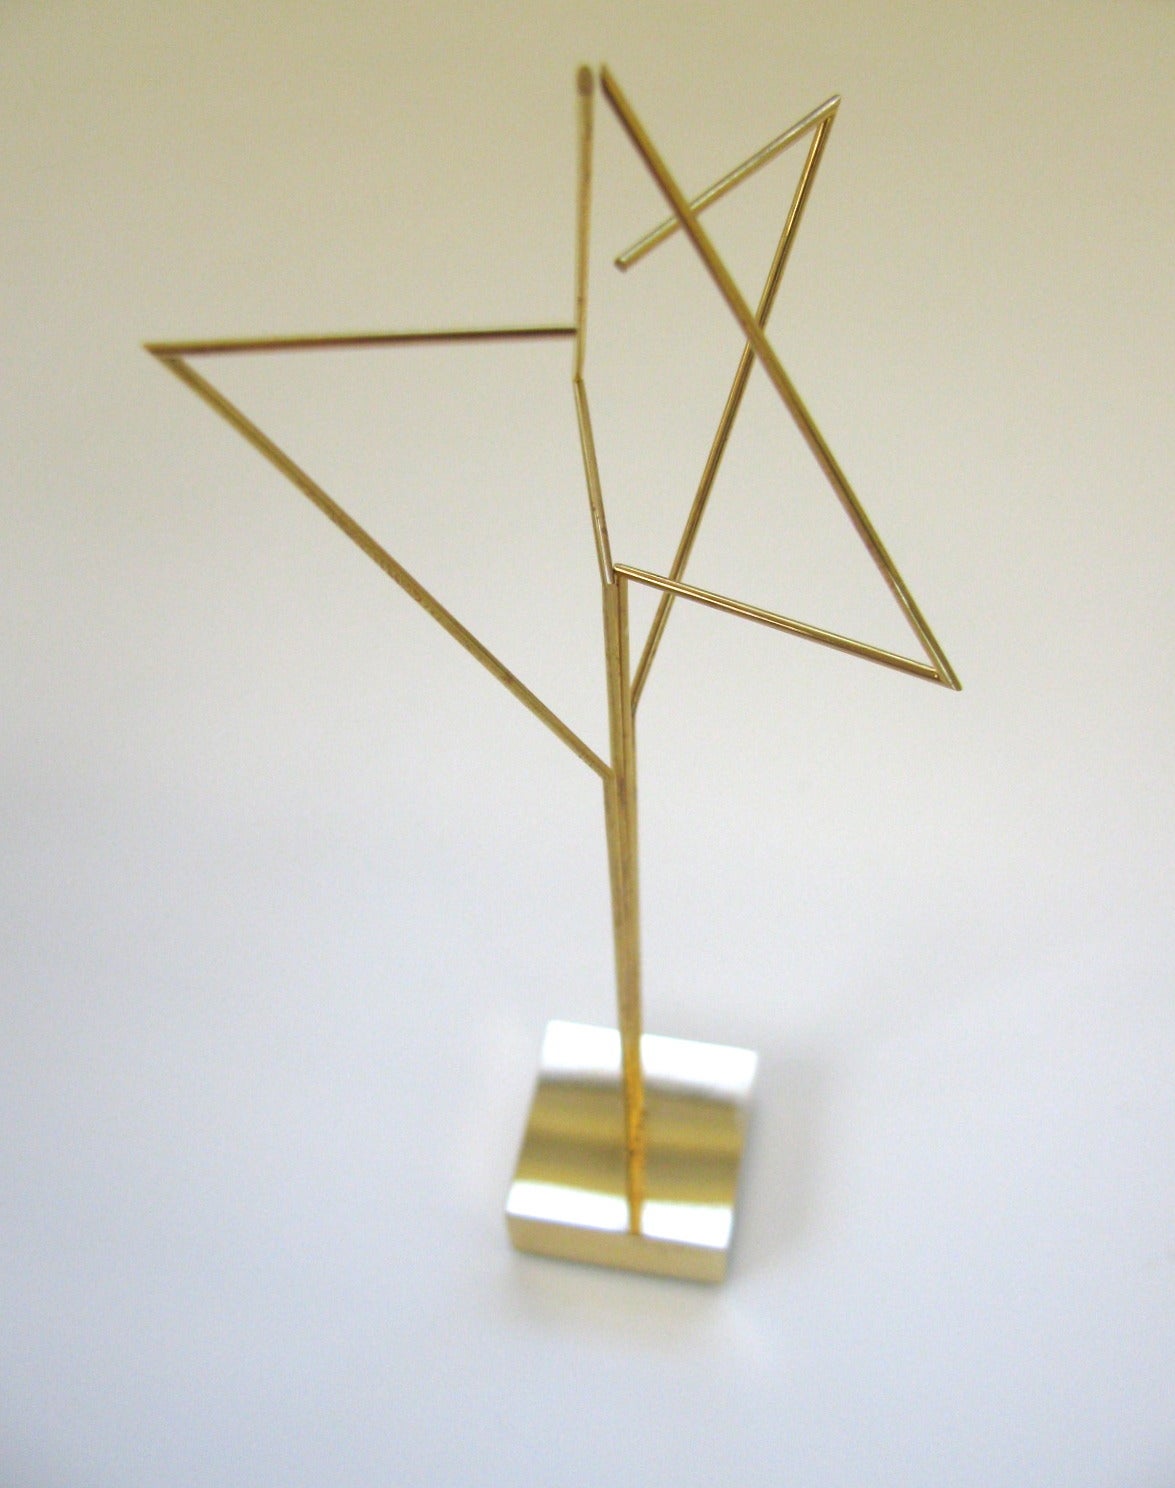 Women's or Men's Modernist Gold Sculpture by Artist Yaakov Agam Edition 1/3 For Sale